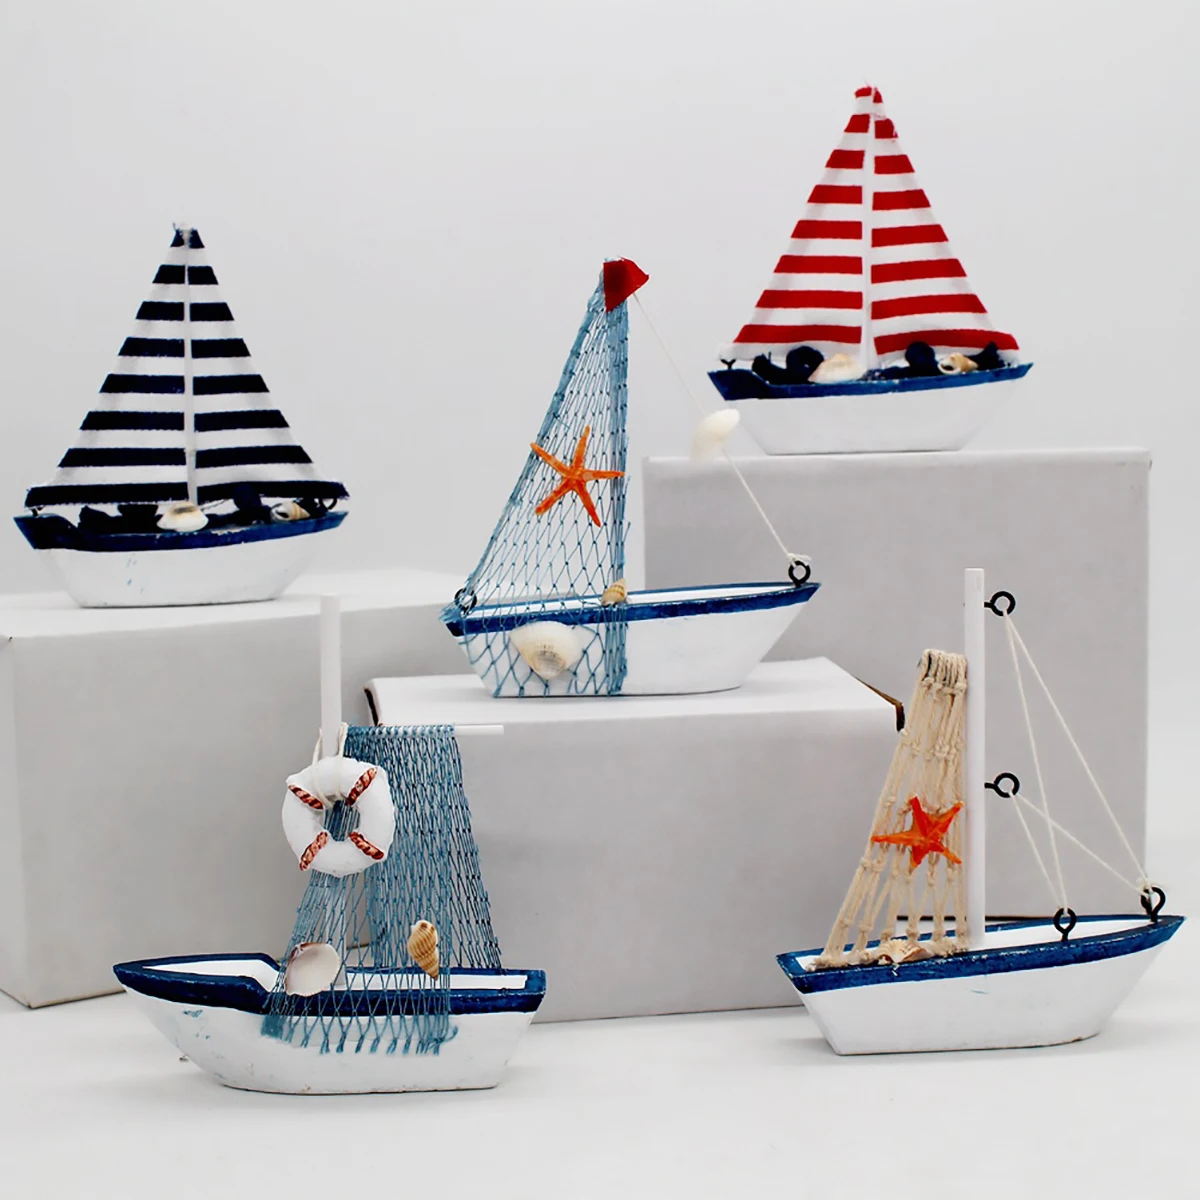 Cute Mini Sailing Boat Model Nautical Home Decor Cloth Sailboat Flag Table Ornament Wood Crafts Toy Kids Gift Drop ship | Дом и сад